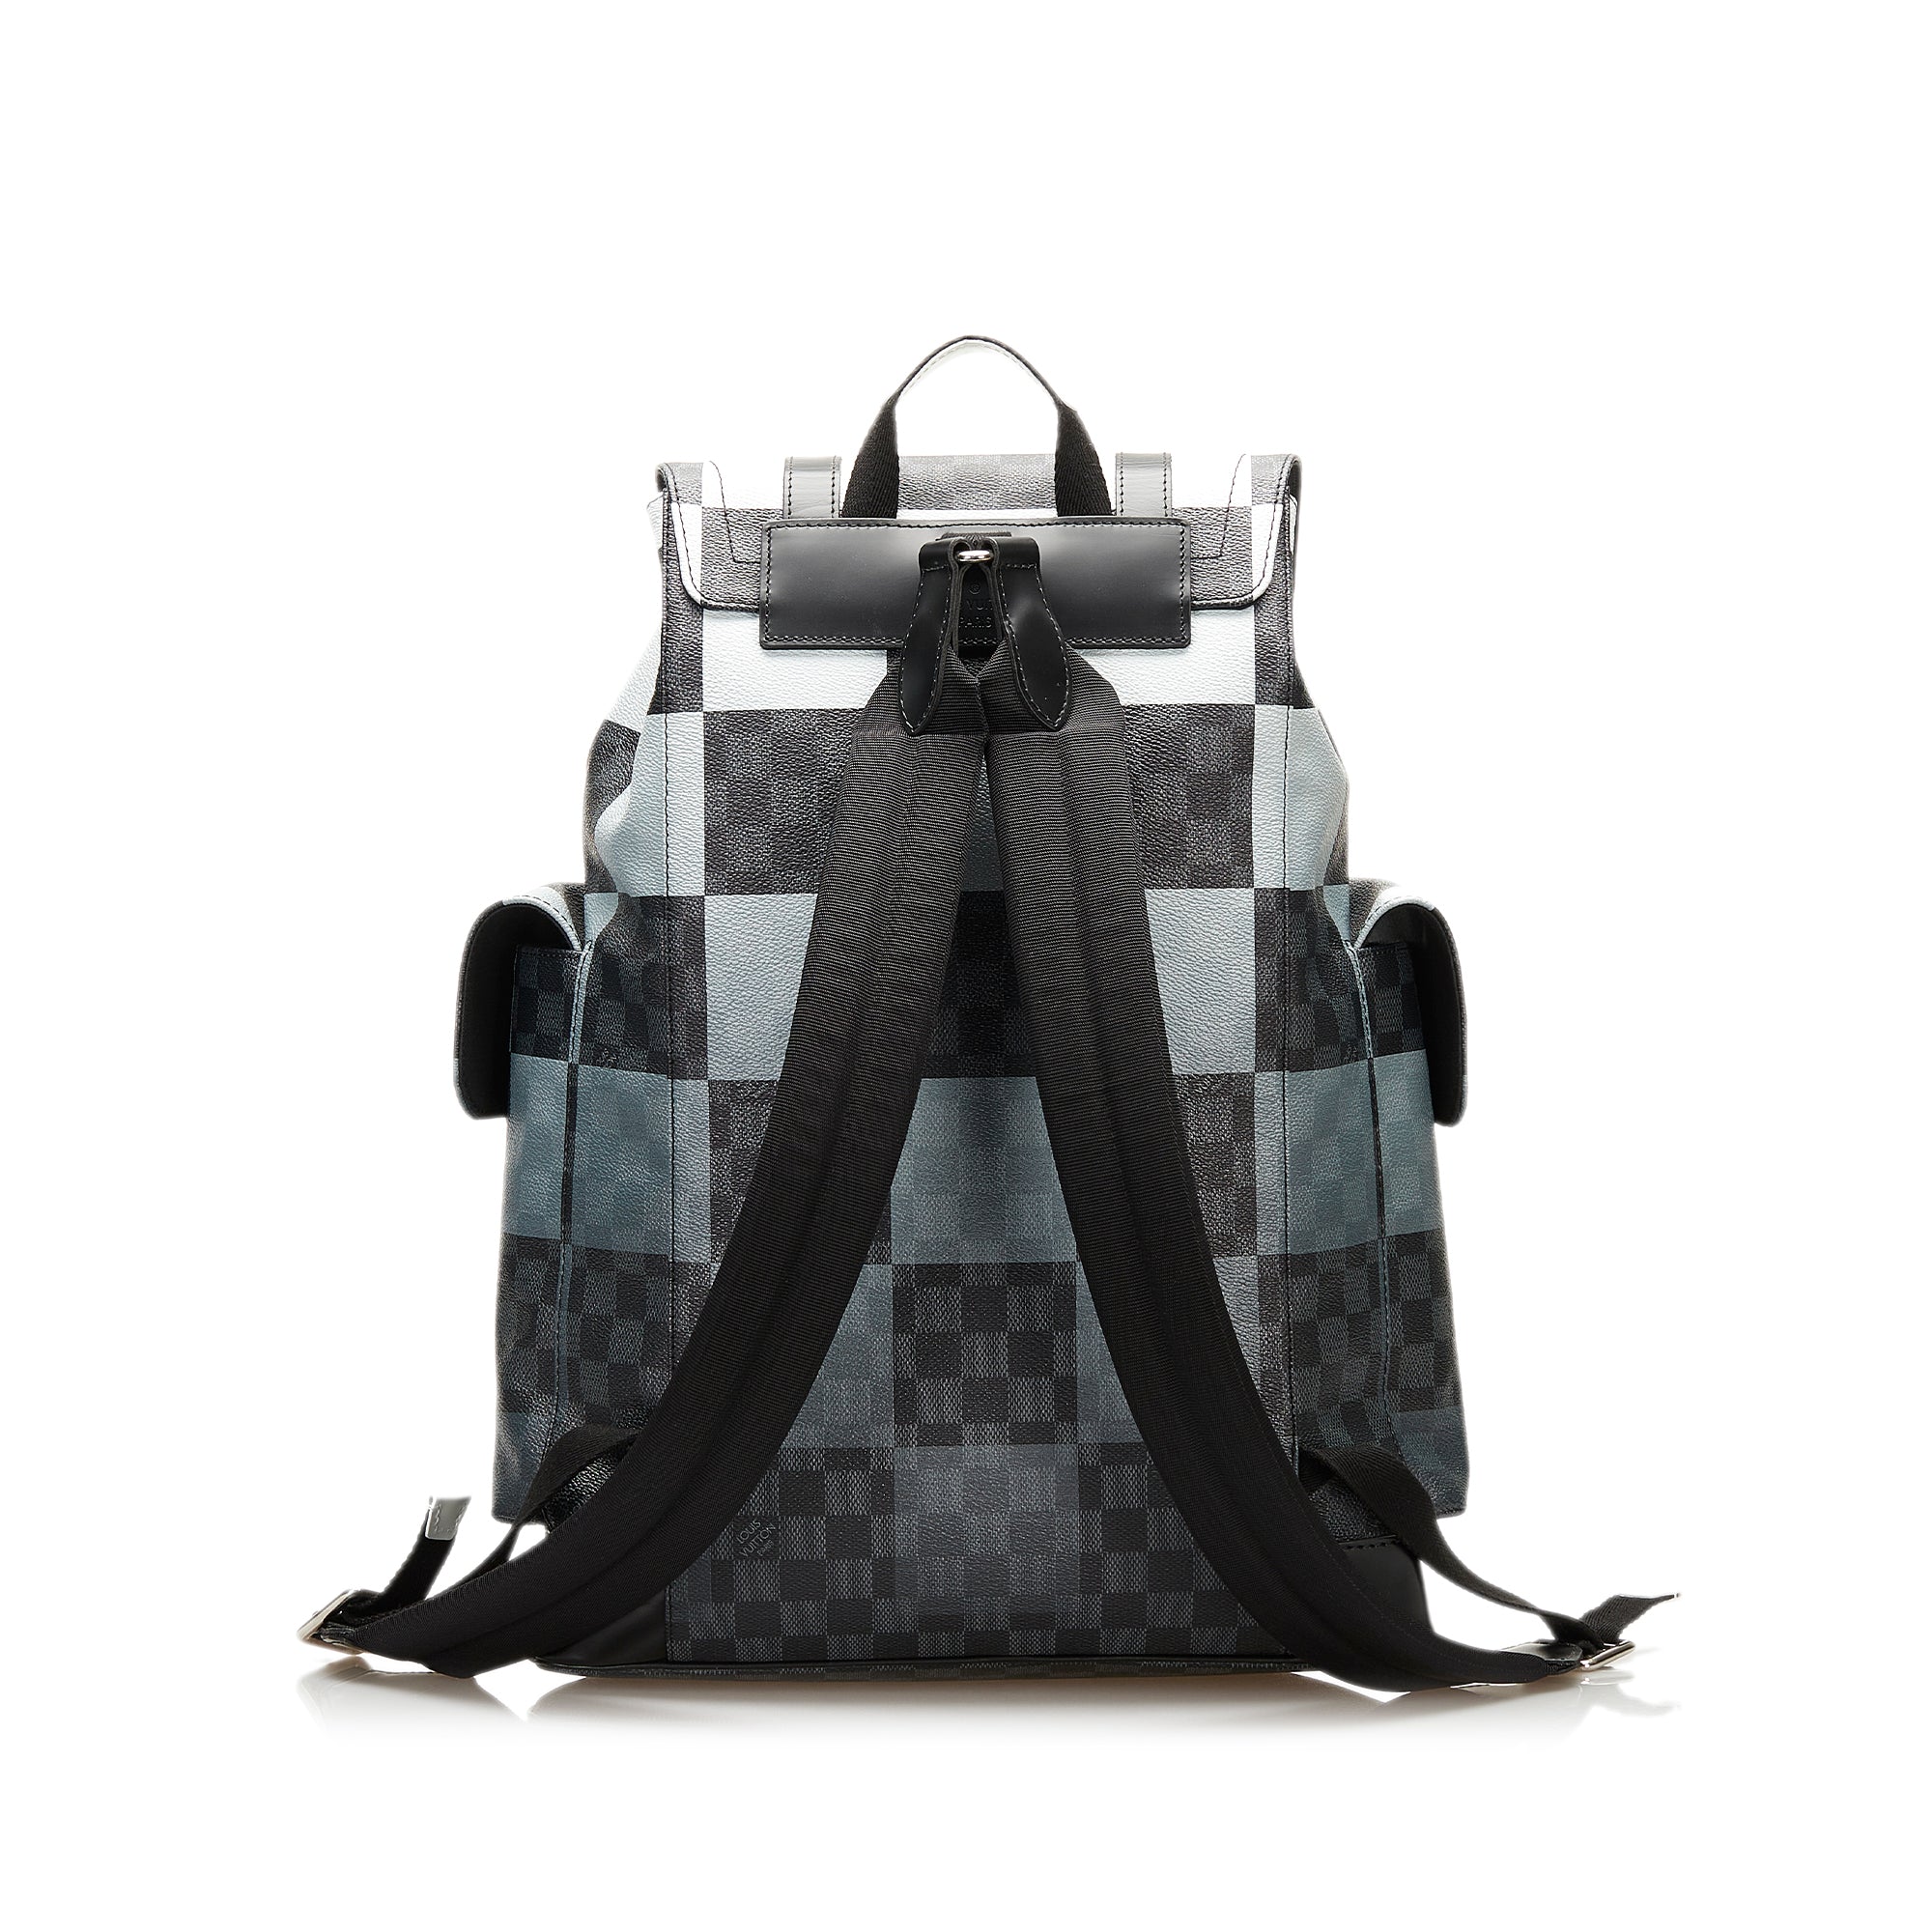 Louis Vuitton Christopher Backpack Damier Graphite Alps in Coated